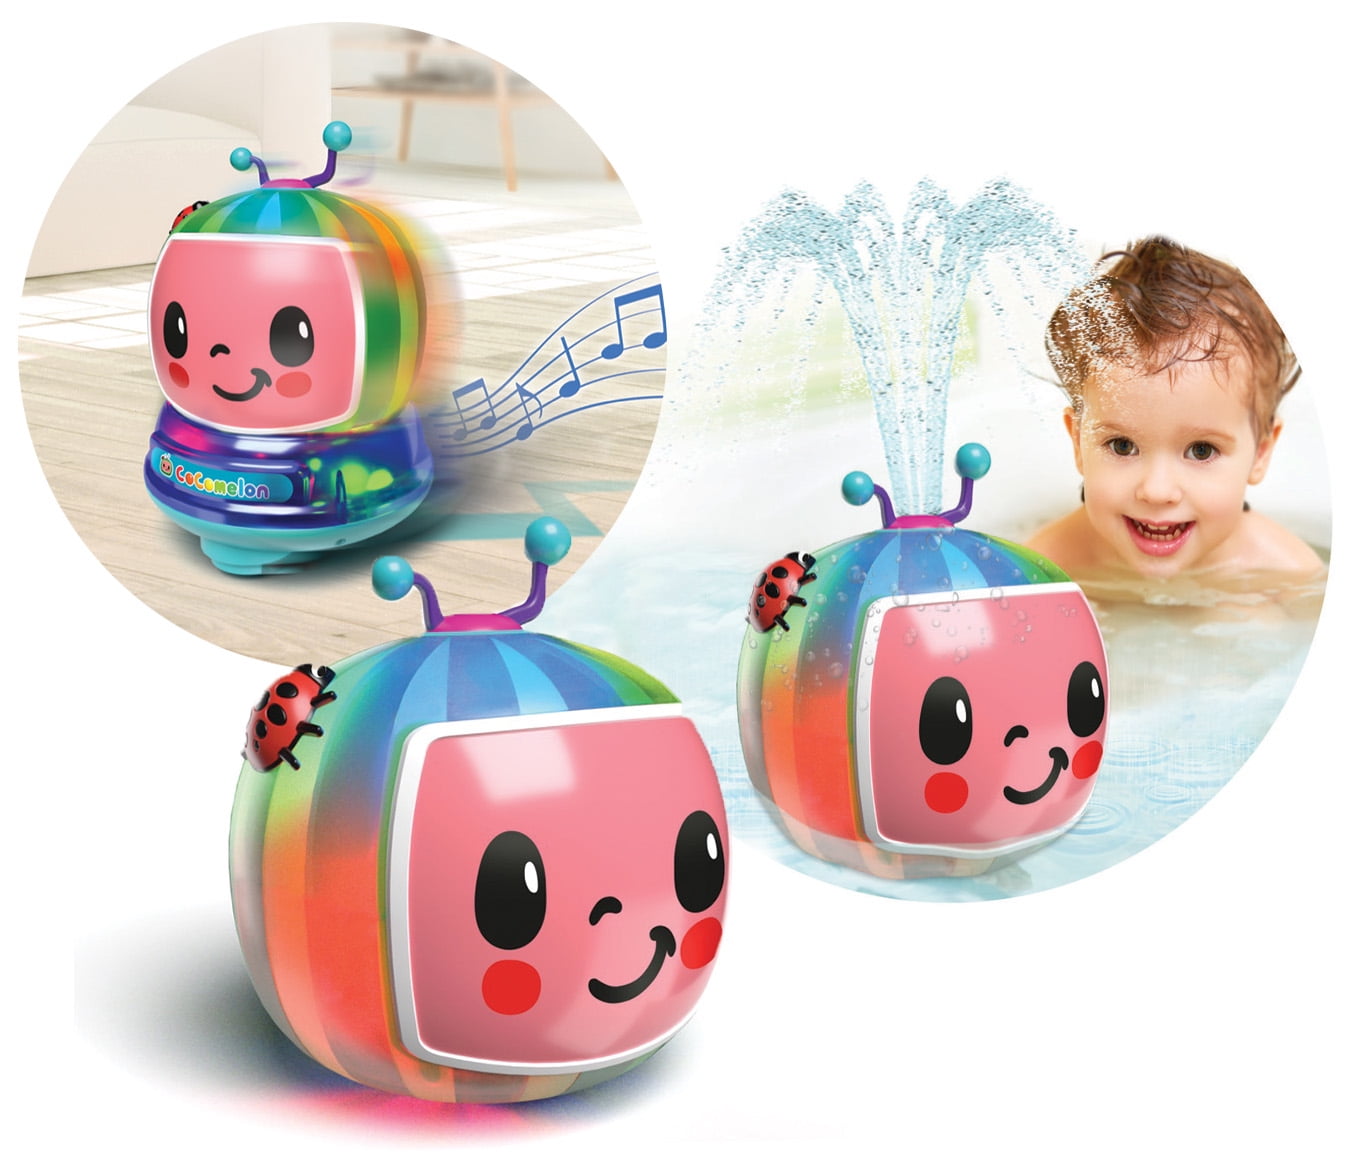 Spark Cocomelon 2-in-1 Spraying Bath Toy with LED Lights for Boys & Girls Ages 3 and up